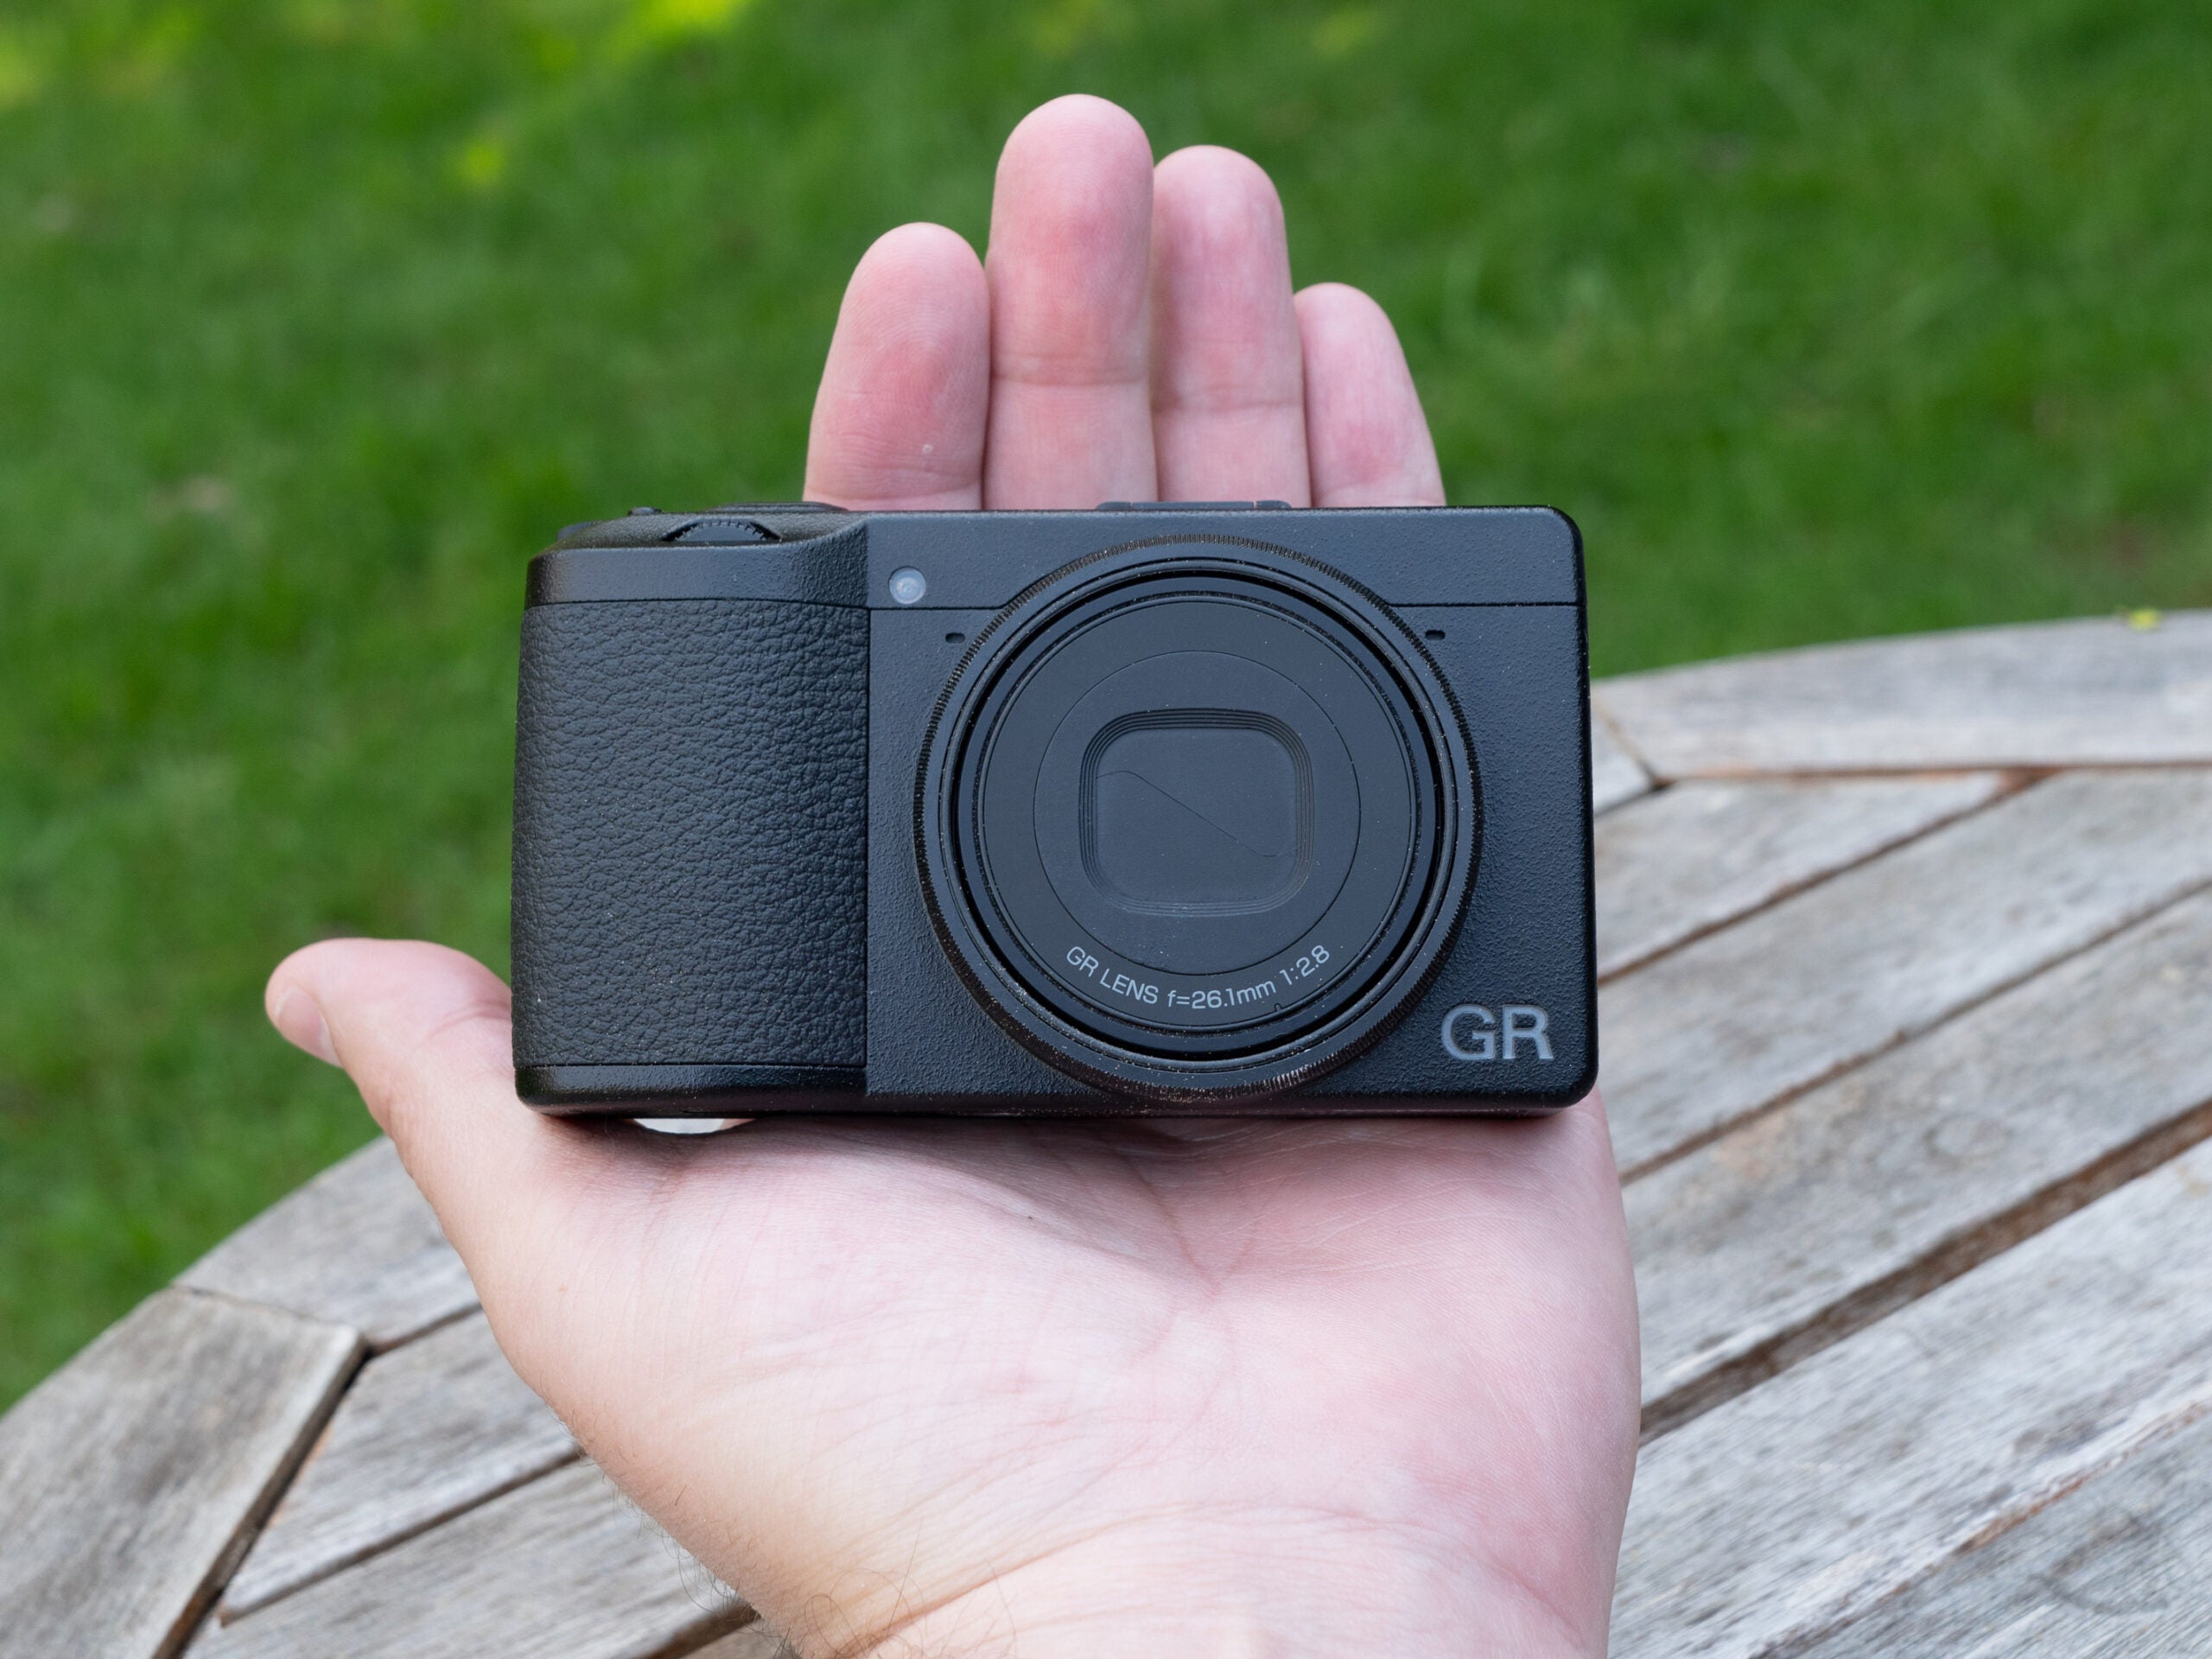 Ricoh GR IIIx in hand.